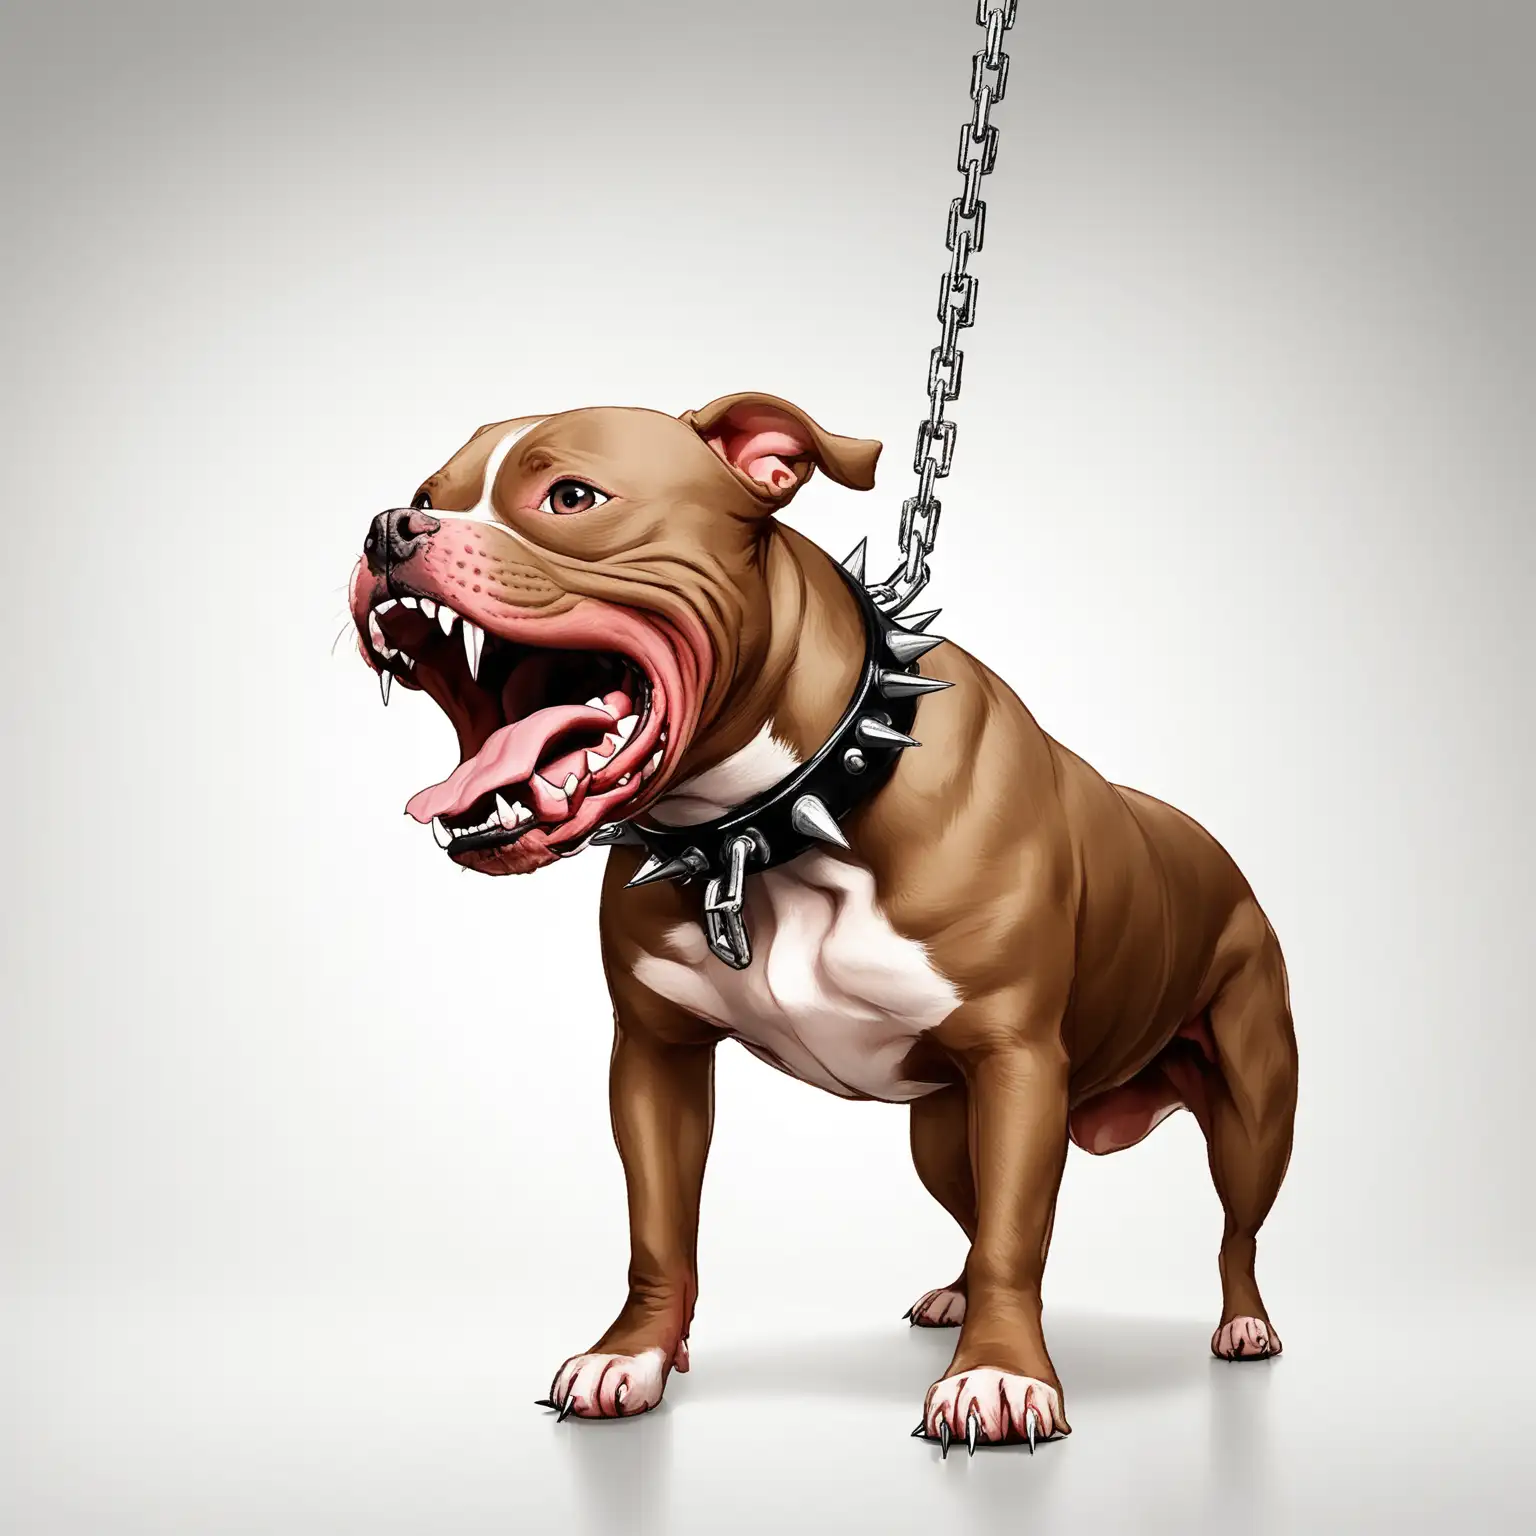 pittbull dog on chain with spiked collar barking aggressively isolated on white background
